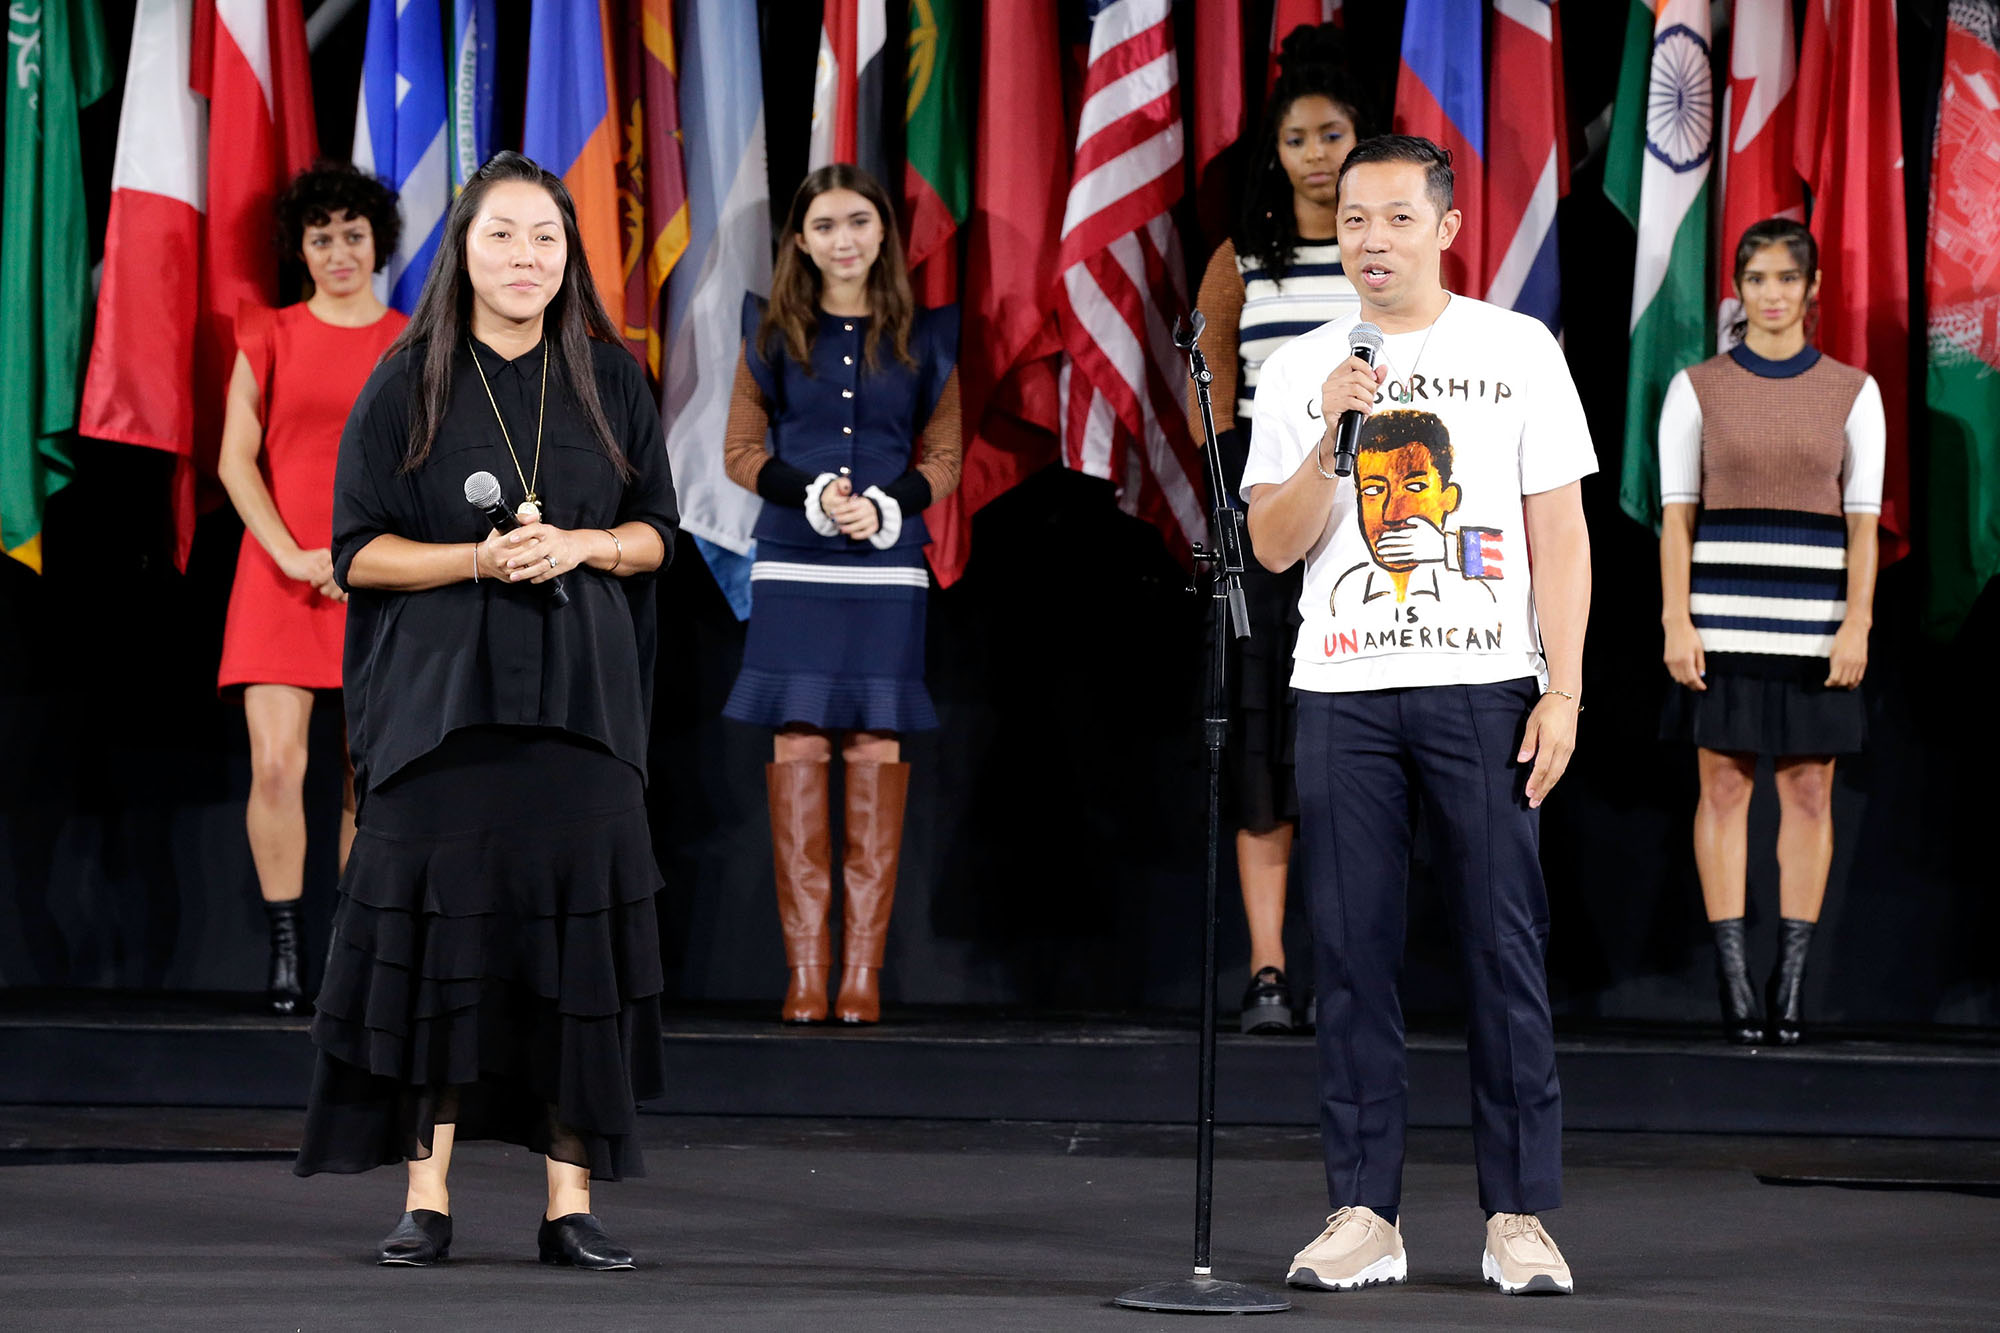 Designers Carol Lim and Humberto Leon speak onstage during the Opening Ceremony fashion show during New York Fashion Week at Jacob Javits Center on September 11, 2016 in New York City.  (Photo by JP Yim/Getty Images) (JP Yim&mdash;Getty Images)